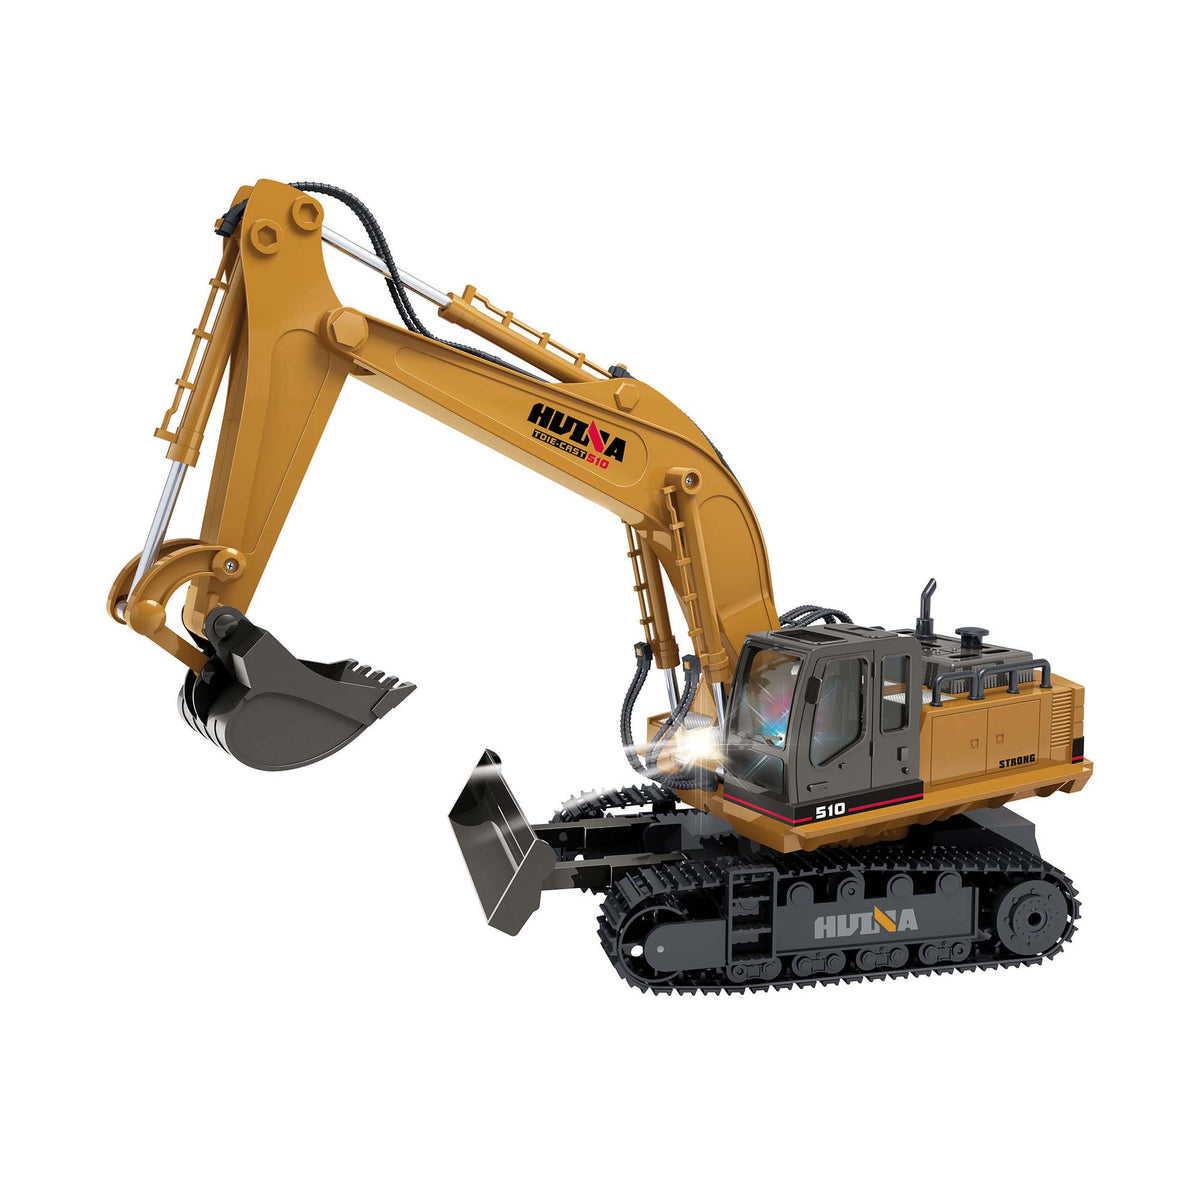 Yellow remote Controlled Tractor Excavator Digger toy with working light on.